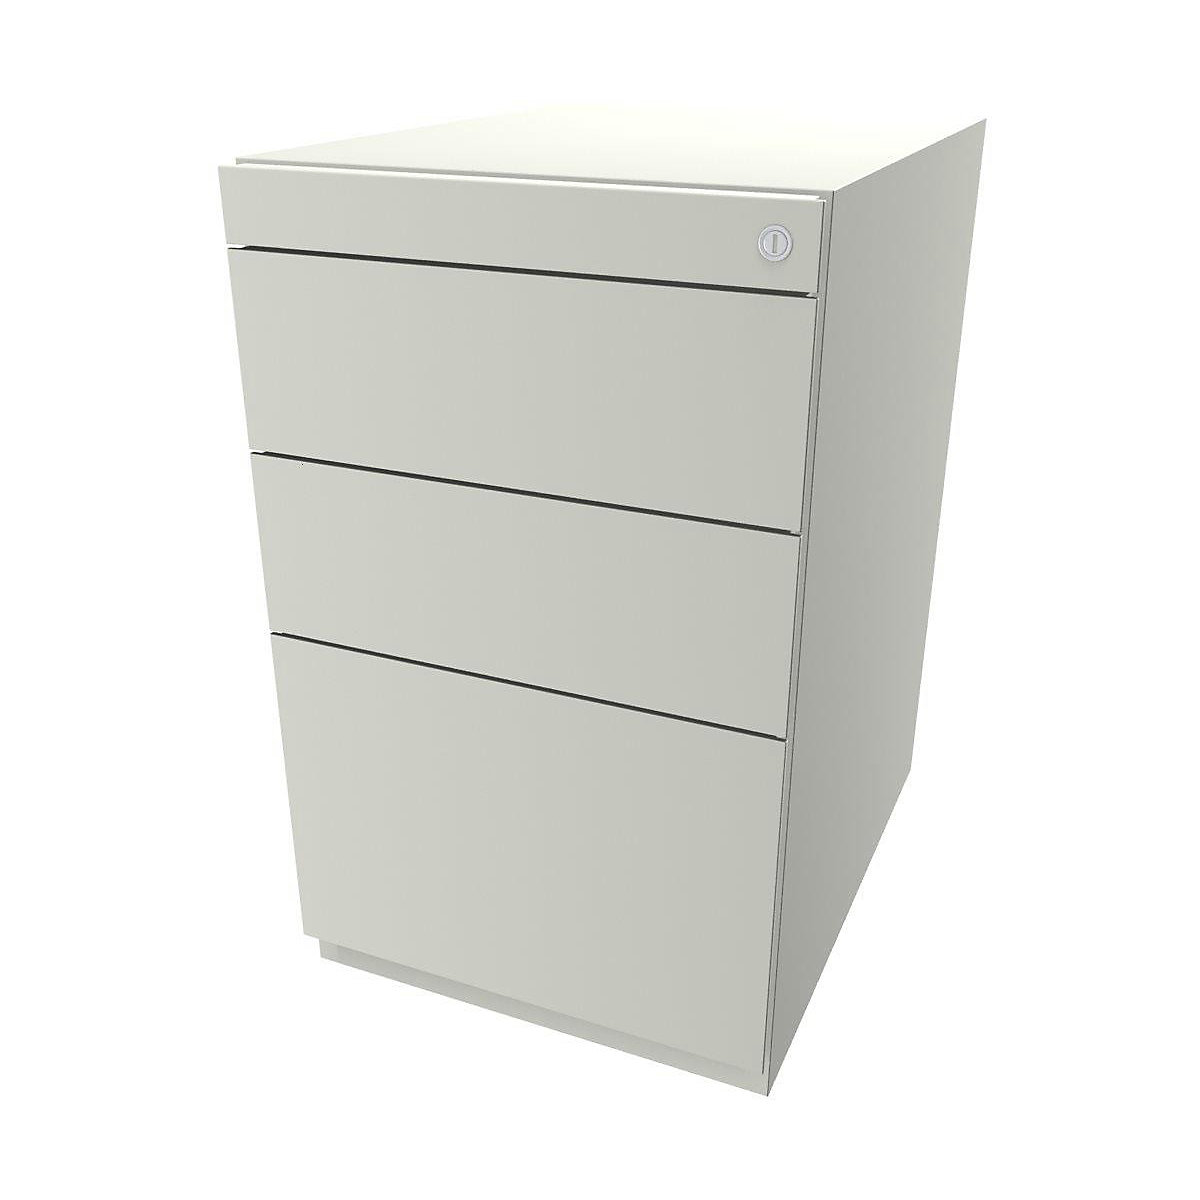 Note™ fixed pedestal, with 2 universal drawers, 1 suspension file drawer – BISLEY, without top, depth 565 mm, pure white-1